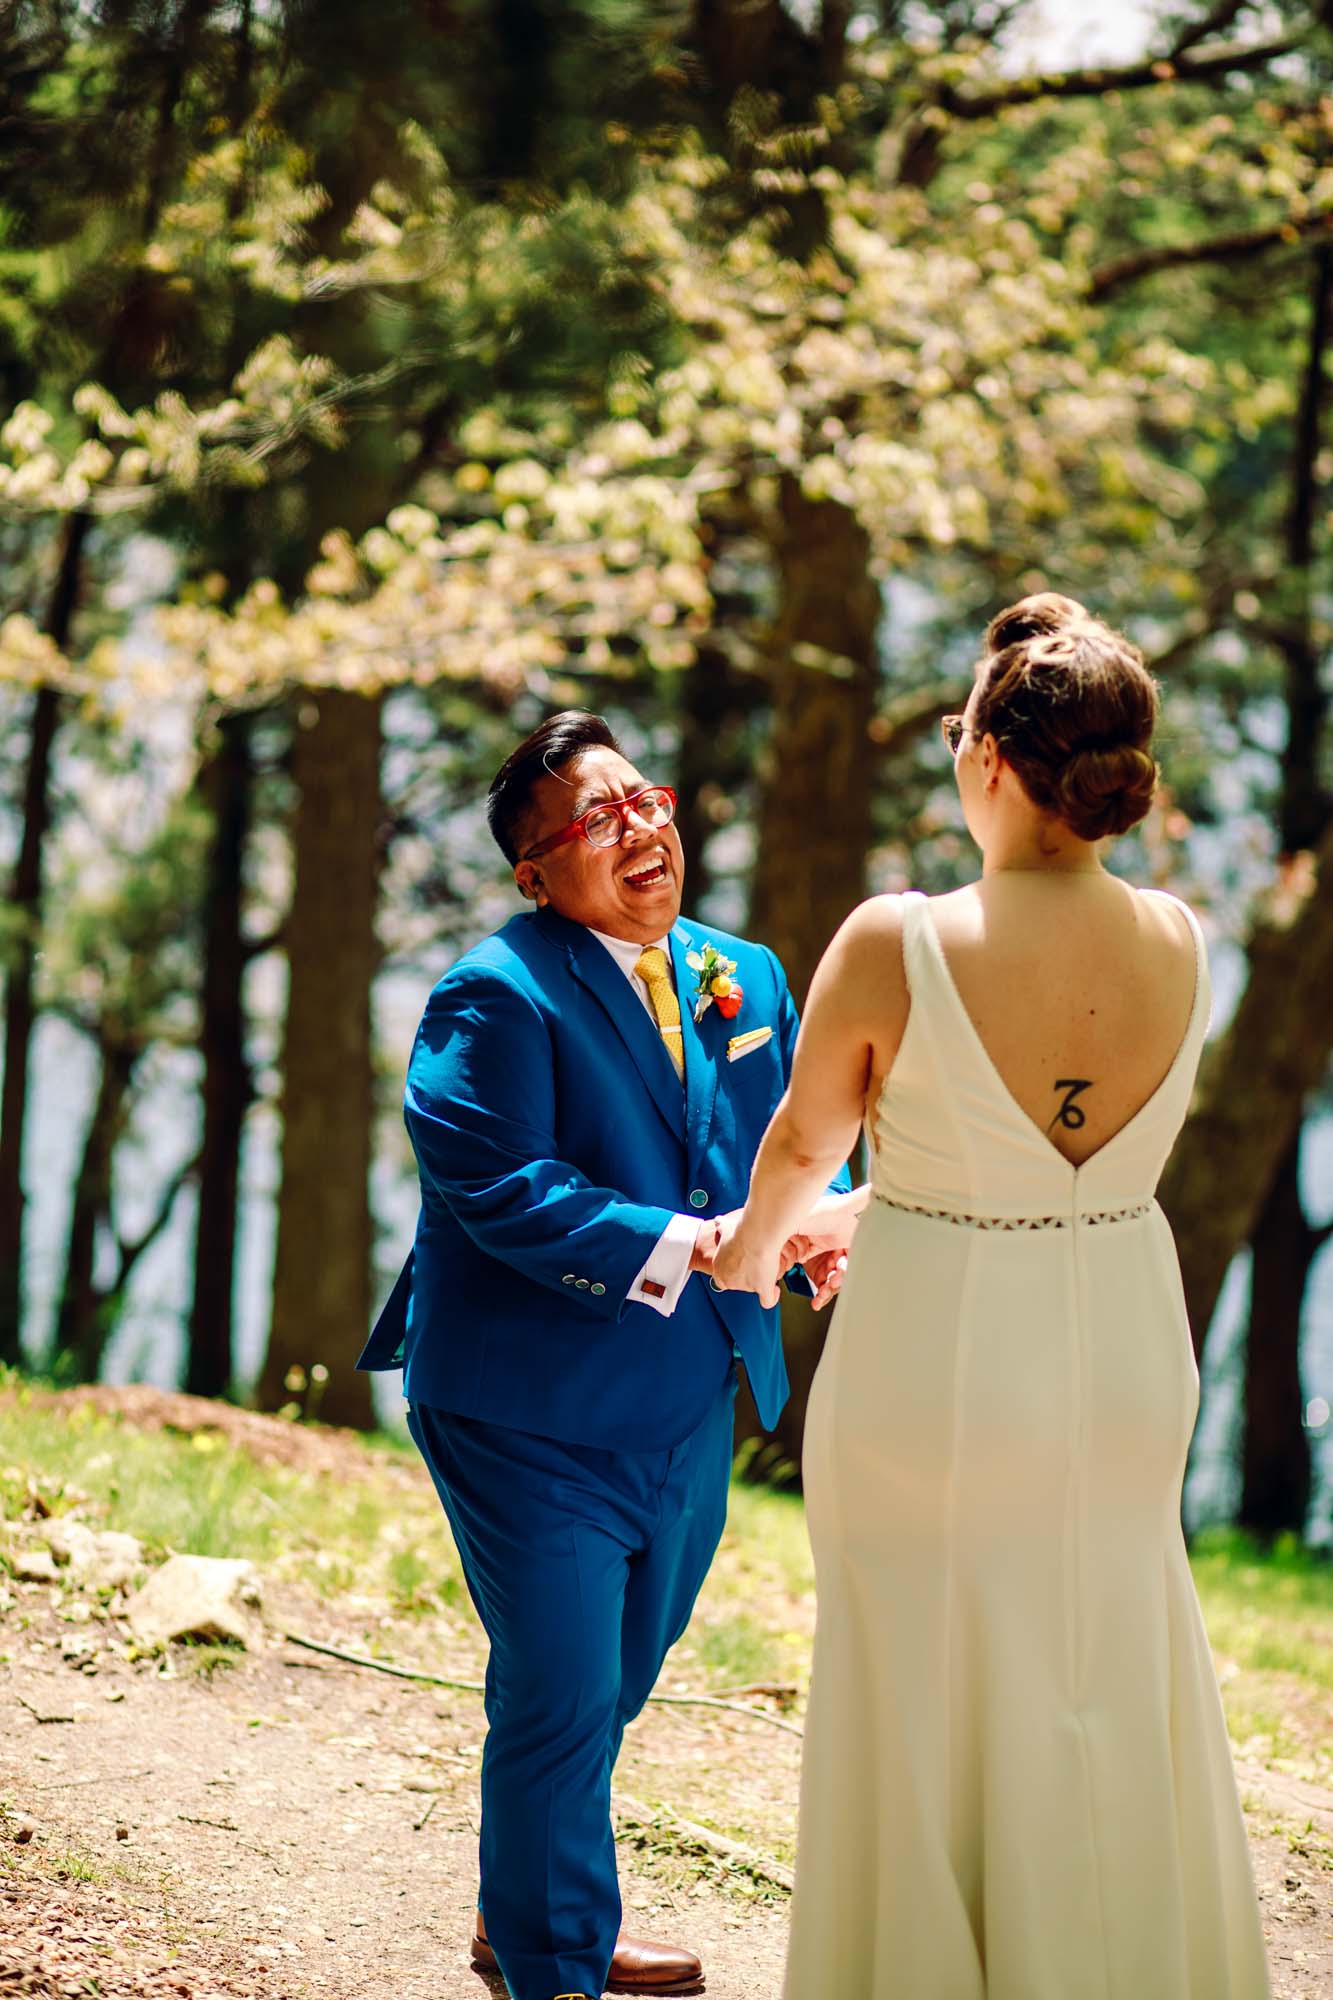 A colorful Wisconsin wedding filled with love and gender inclusivity | Tuan B & Co | Featured on Equally Wed, the leading LGBTQ+ wedding magazine